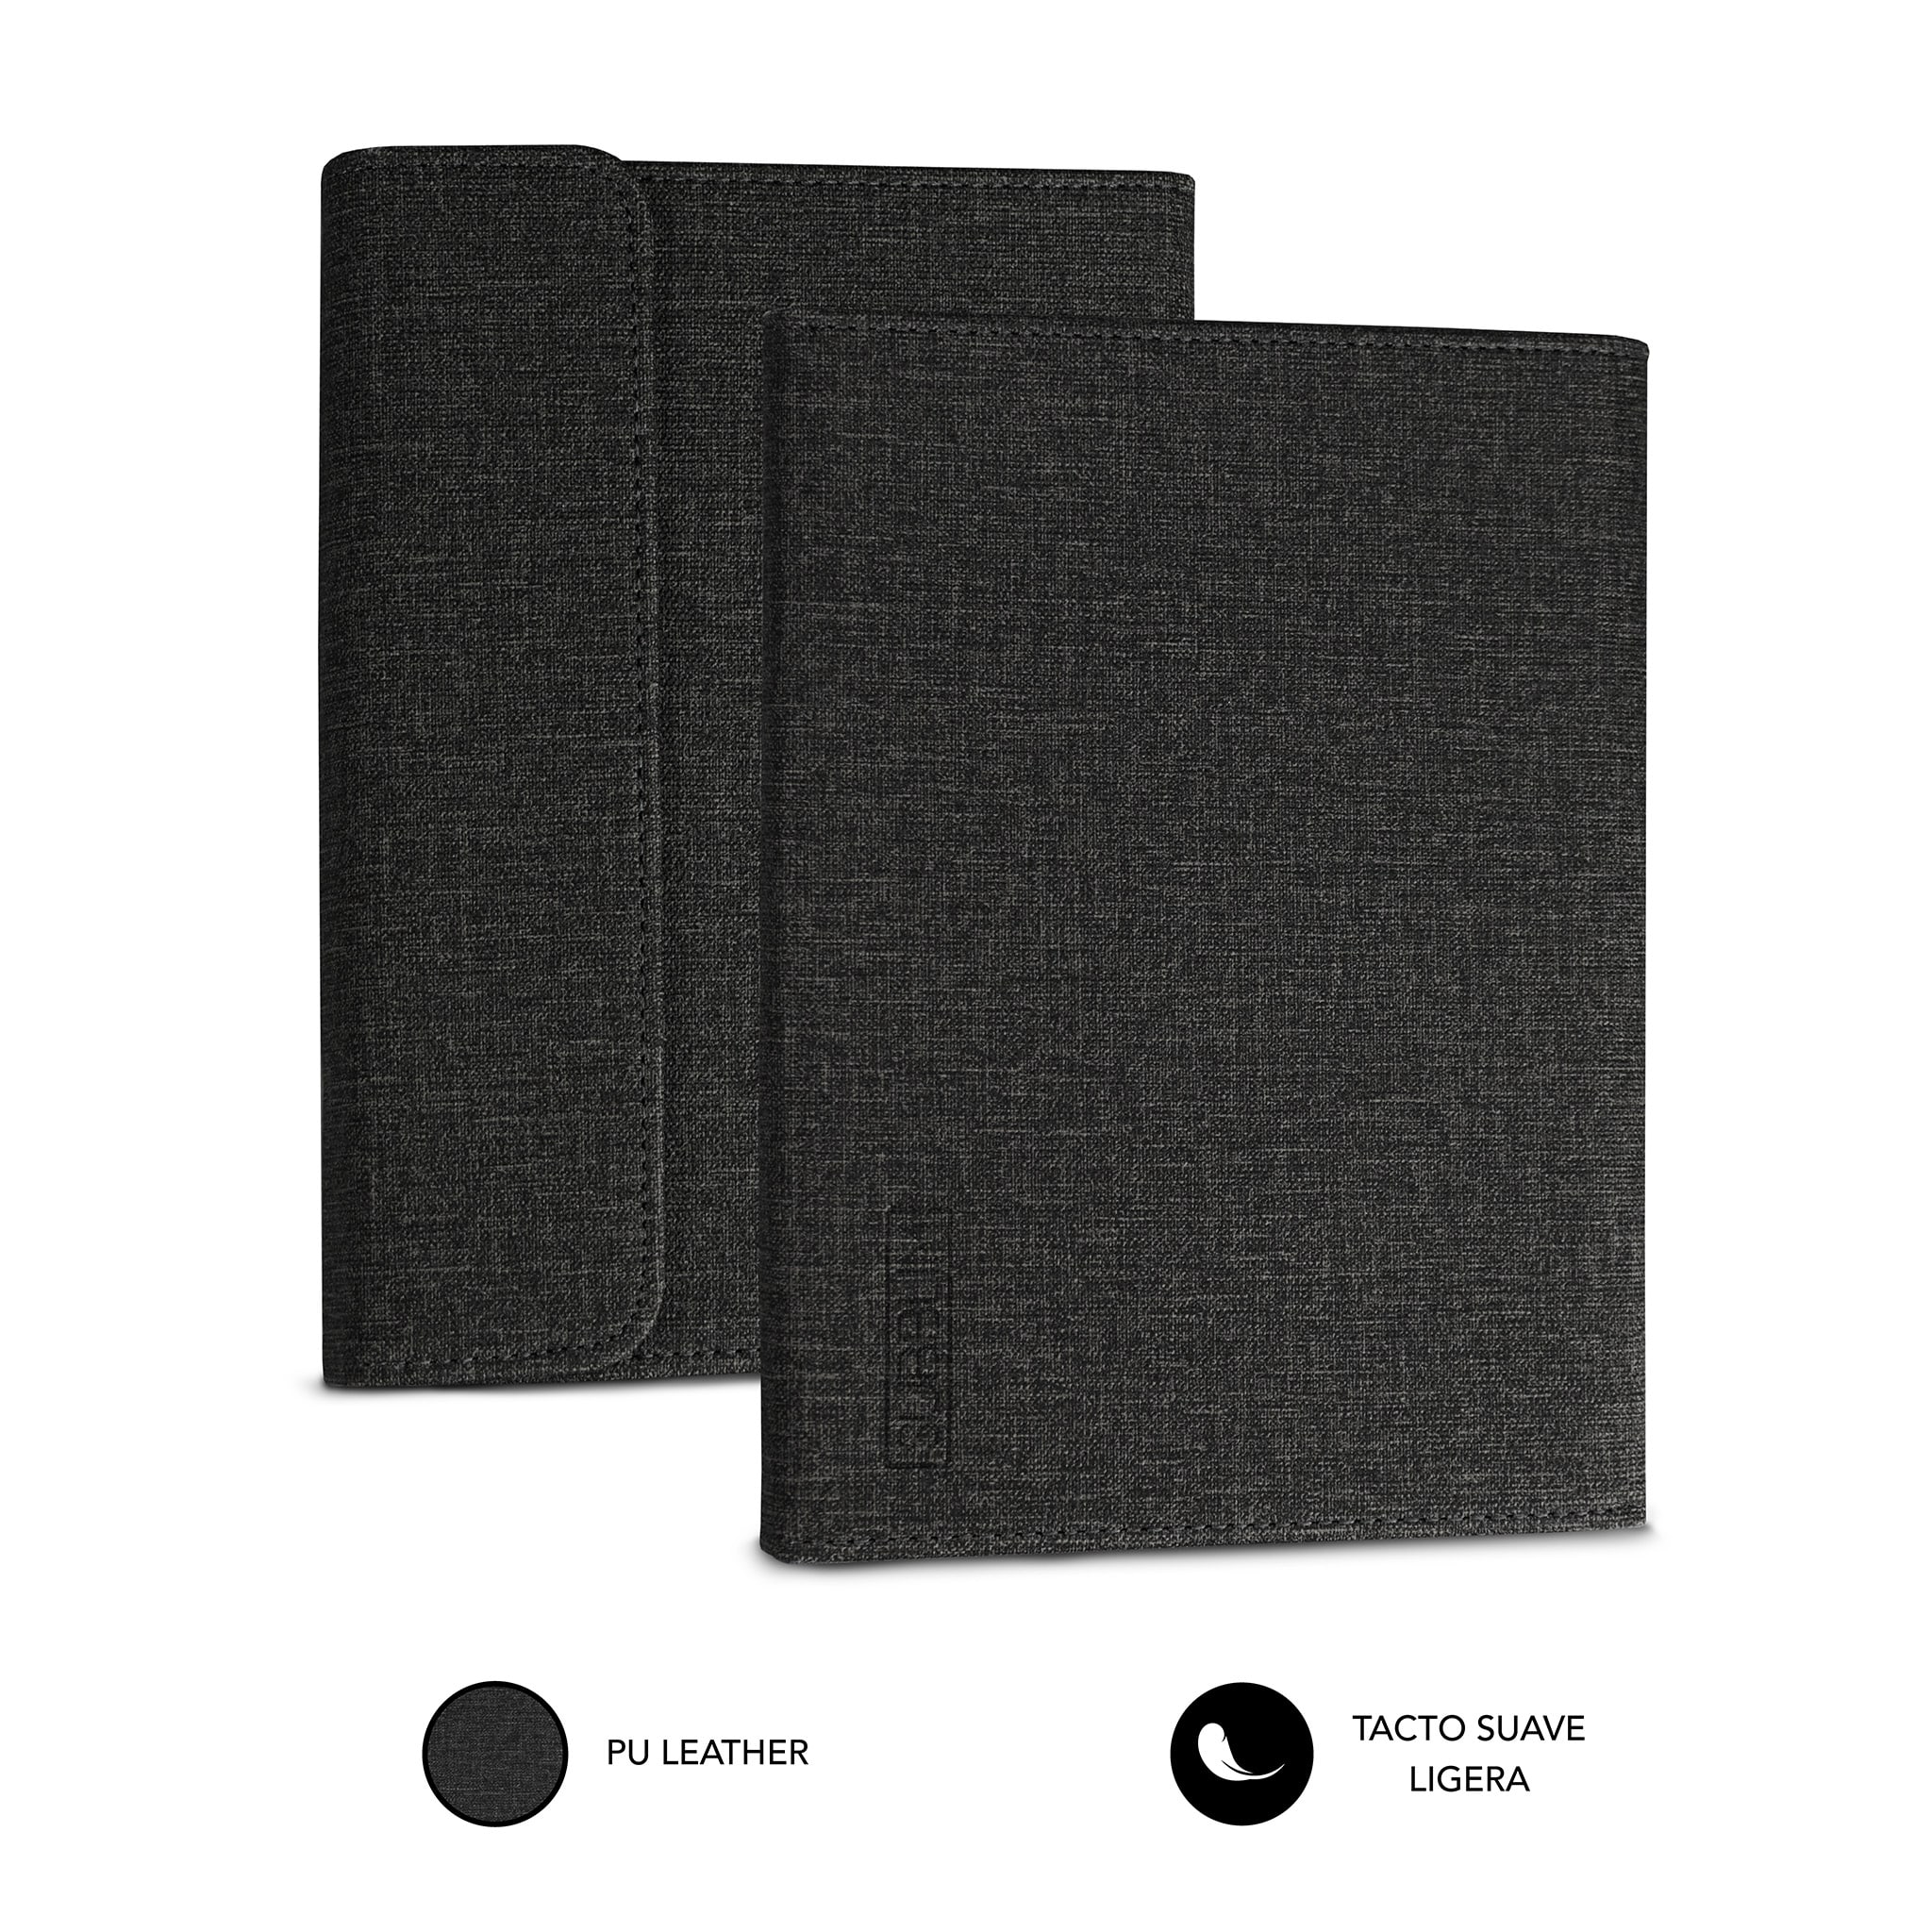 FUNDA EBOOK POCKETBOOK COVER BLACK BASIC LUX 3 / TOUCH LUX 5